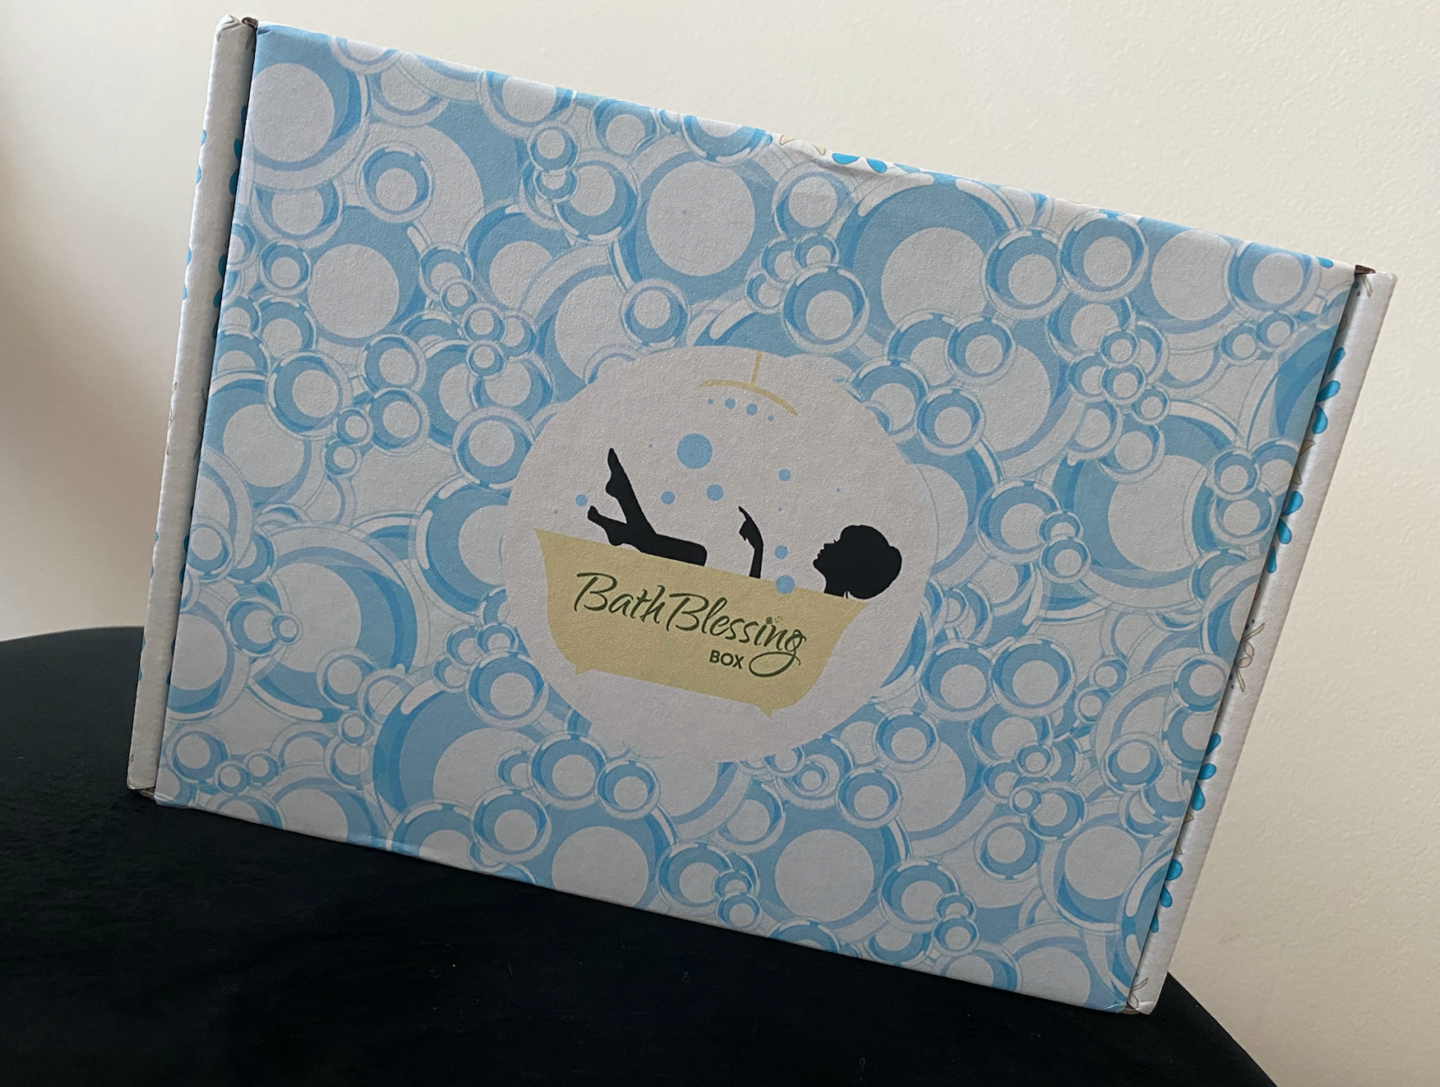 Soak Up Relaxation with Bath Blessing Box: Golden Clover Spring Unboxing Review